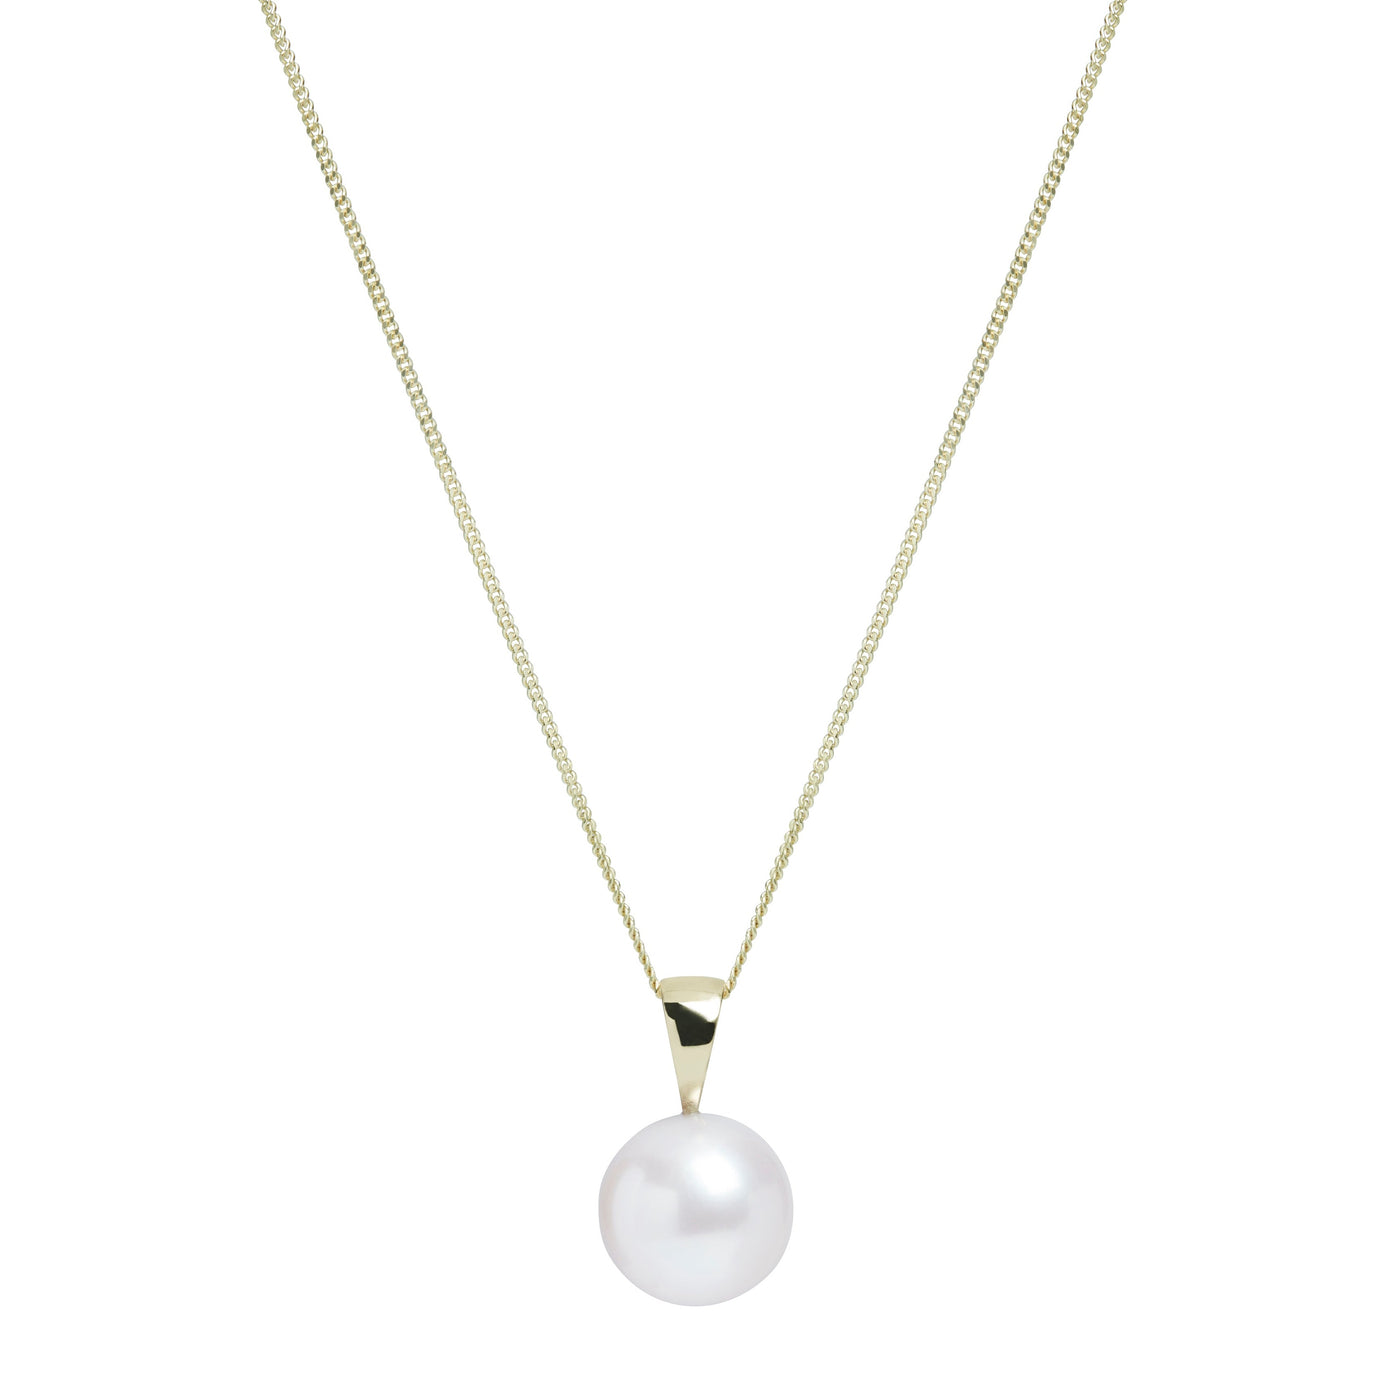 10-10.5mm Round White Freshwater Pearl 9ct Yellow Gold Pendant